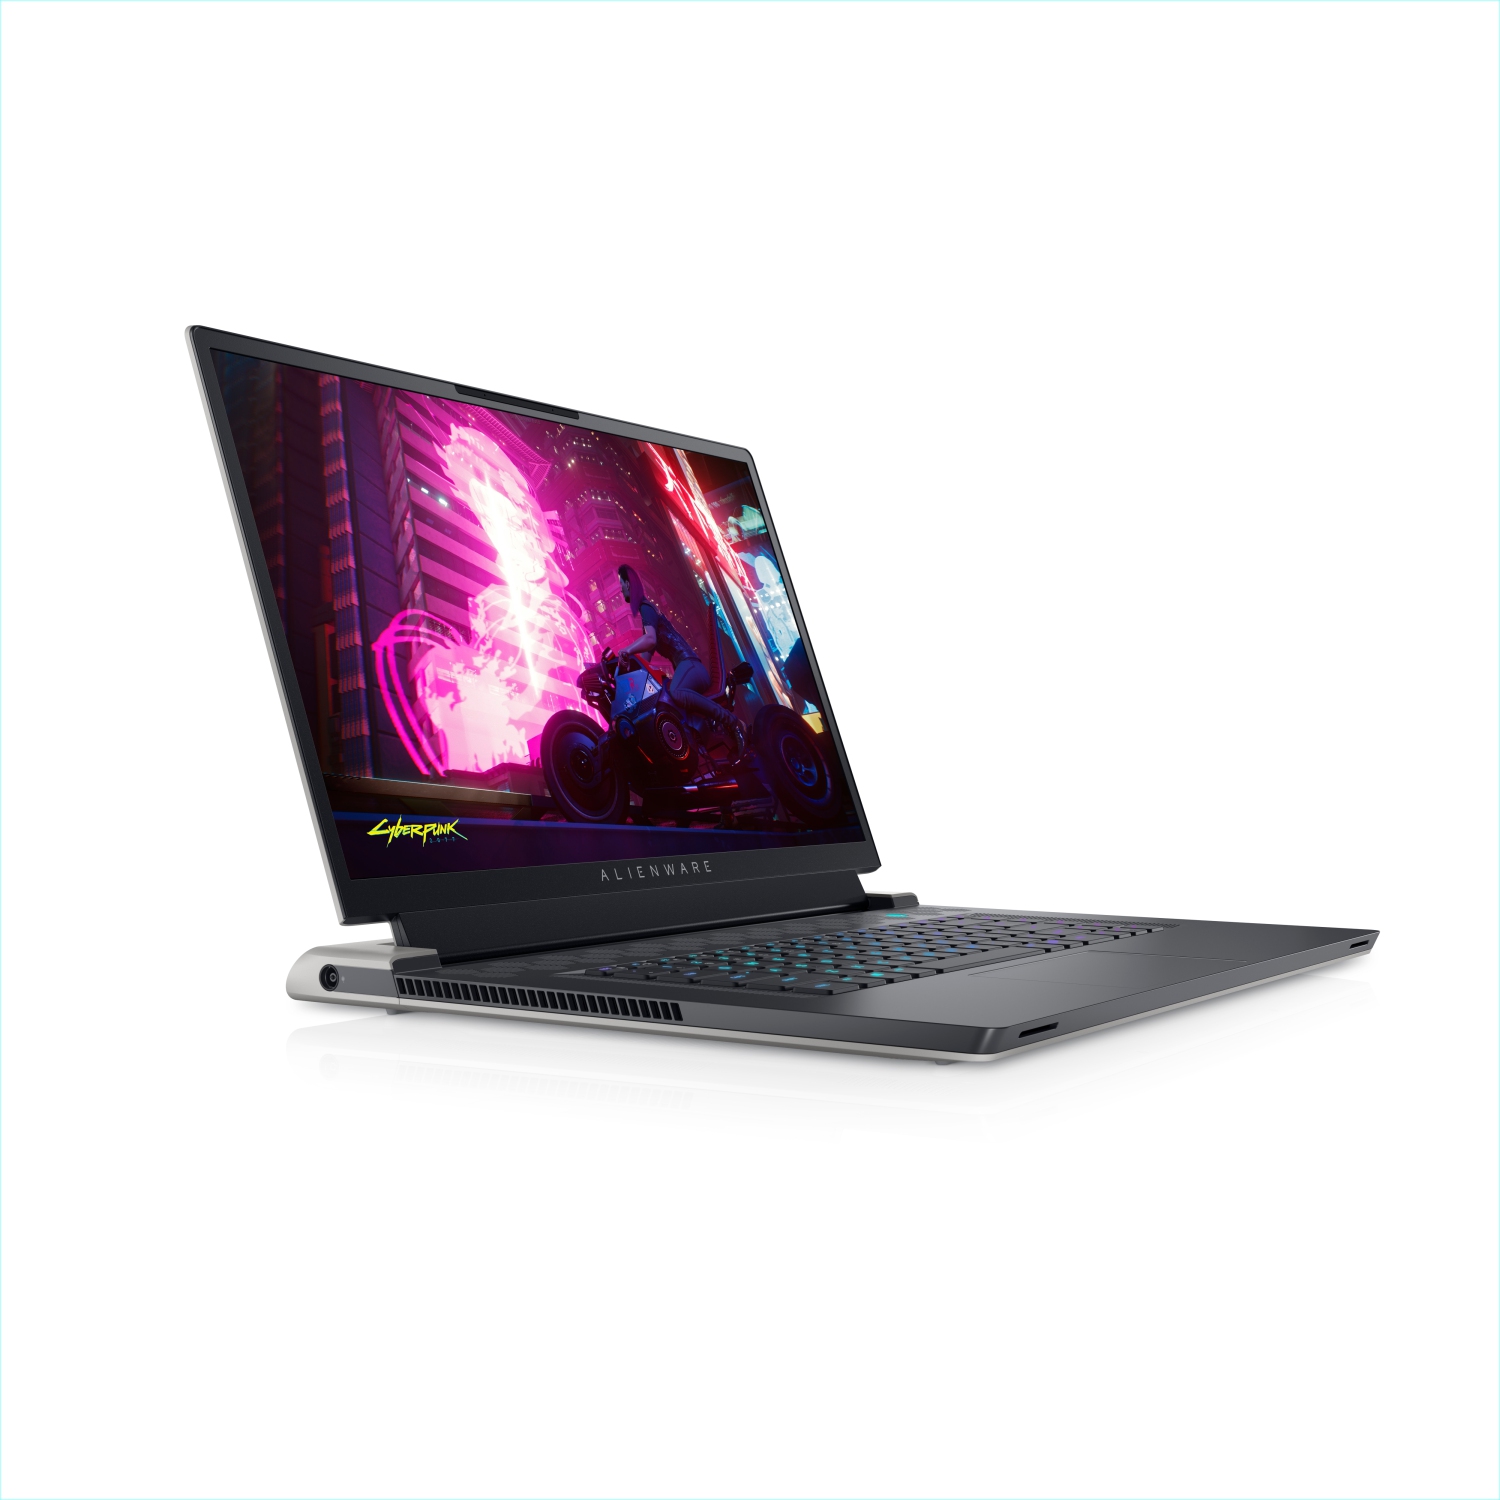 Refurbished (Excellent) - Dell Alienware X17 R1 Gaming Laptop (2021), 17.3" 4K, Core i7, 256GB SSD, 32GB RAM, RTX 3070, 8 Cores @ 4.6 GHz, 11th Gen CPU Certified